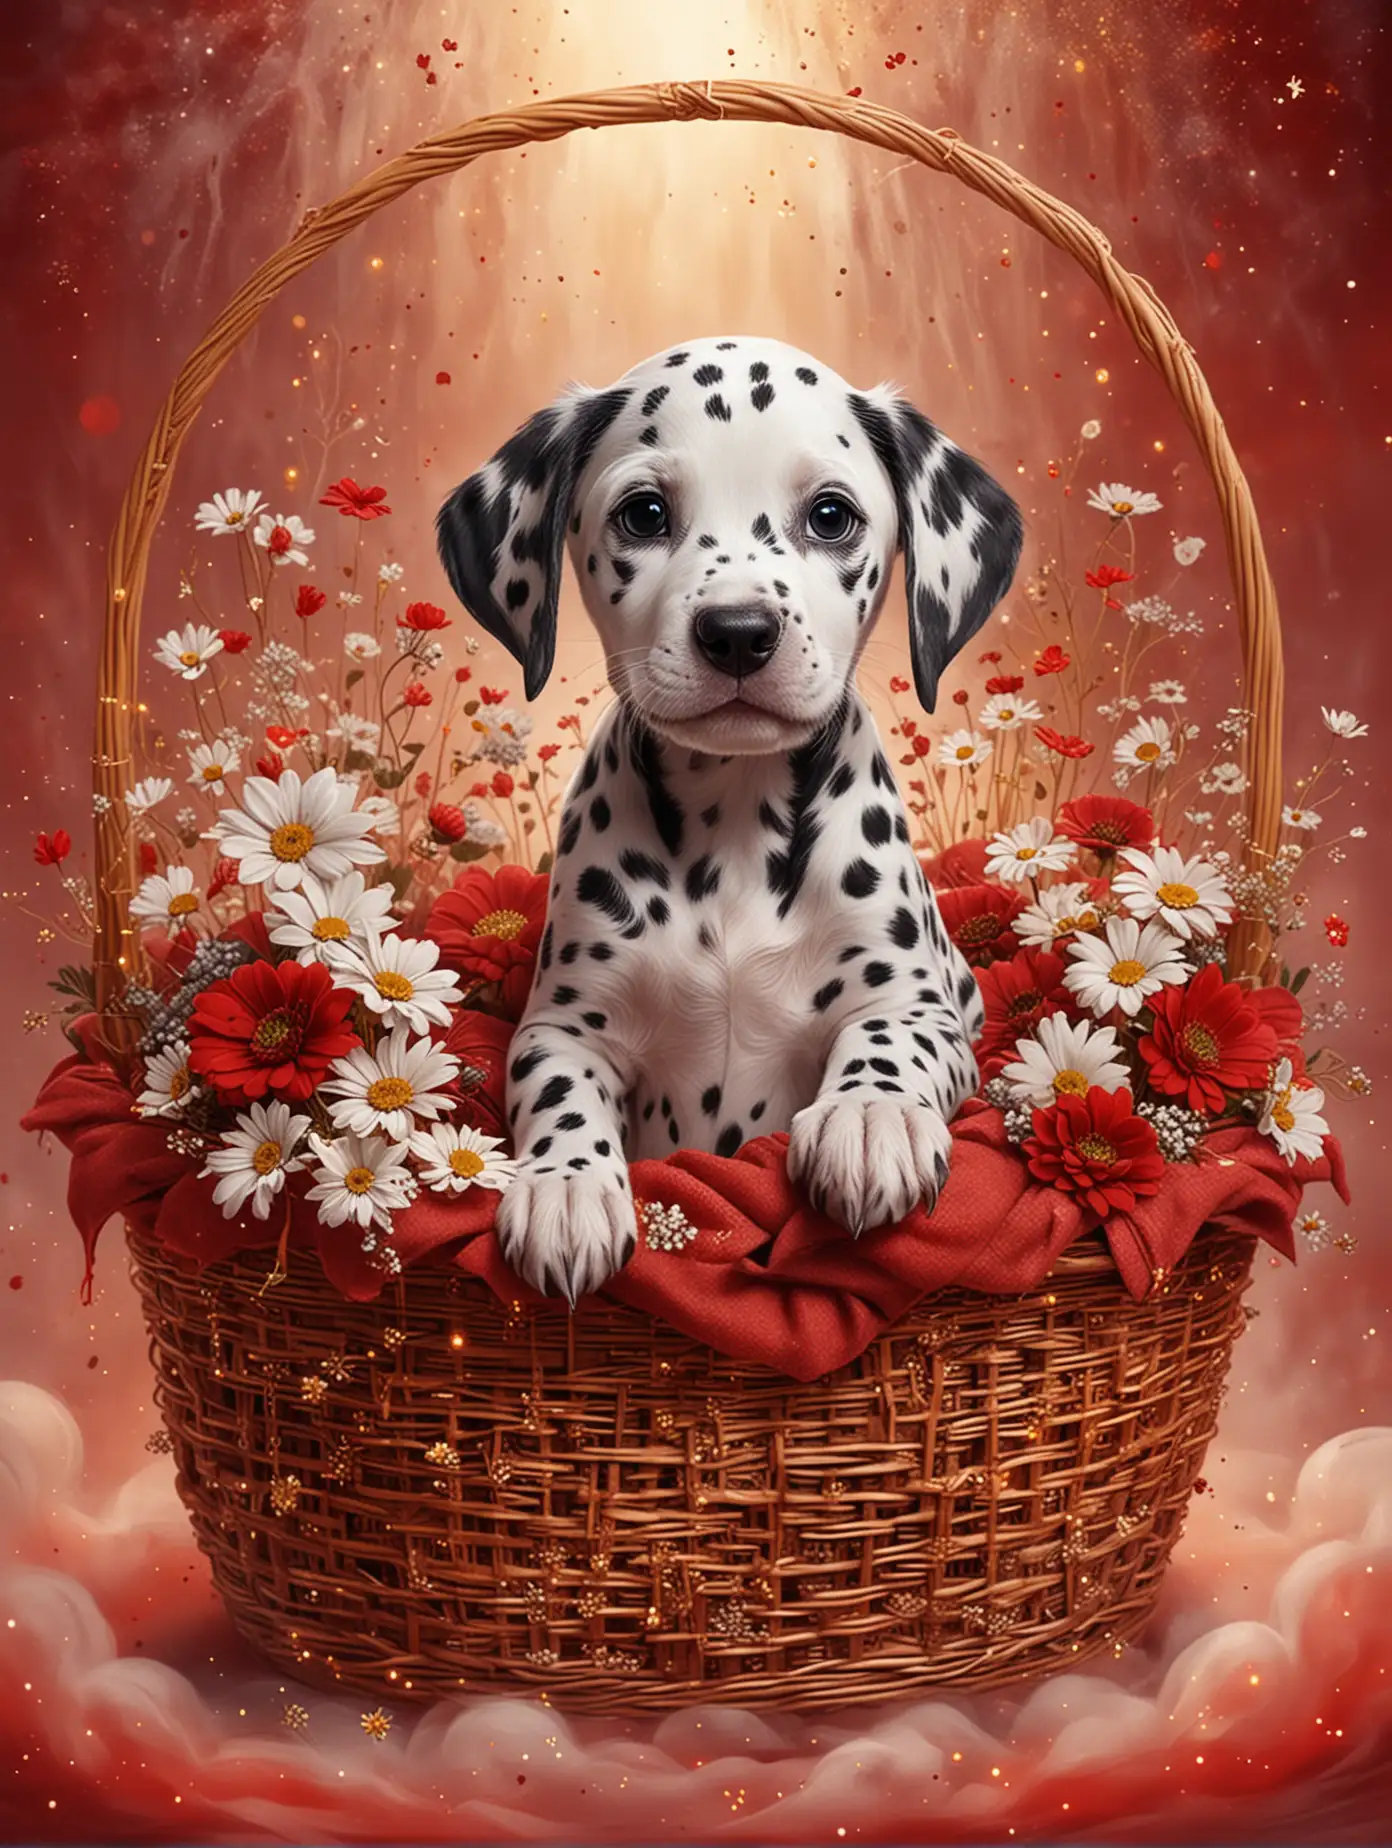 Dalmatian Puppy Surrounded by Enchanting Floral Magic